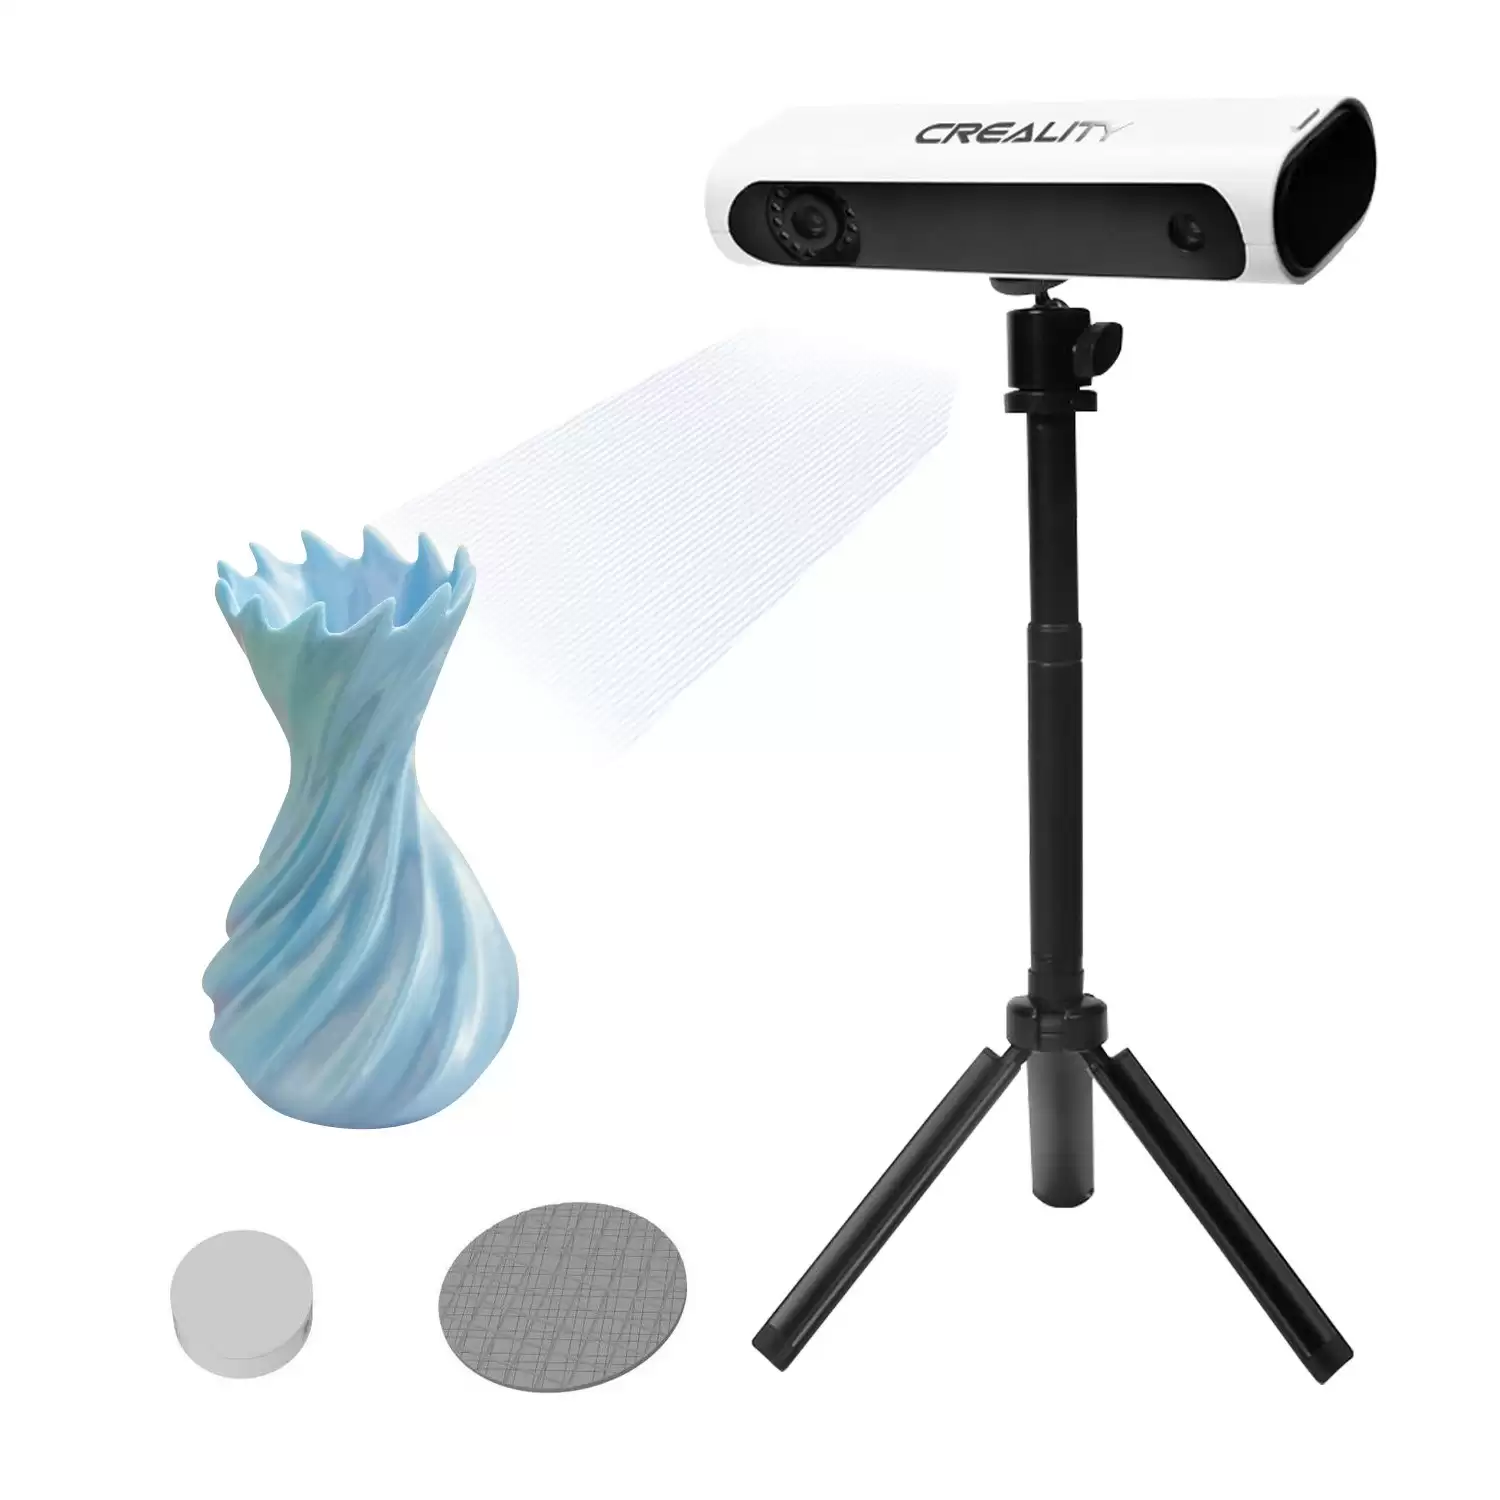 Order In Just $459 Original Creality Cr-Scan01 Portable 3d Scanner At Tomtop